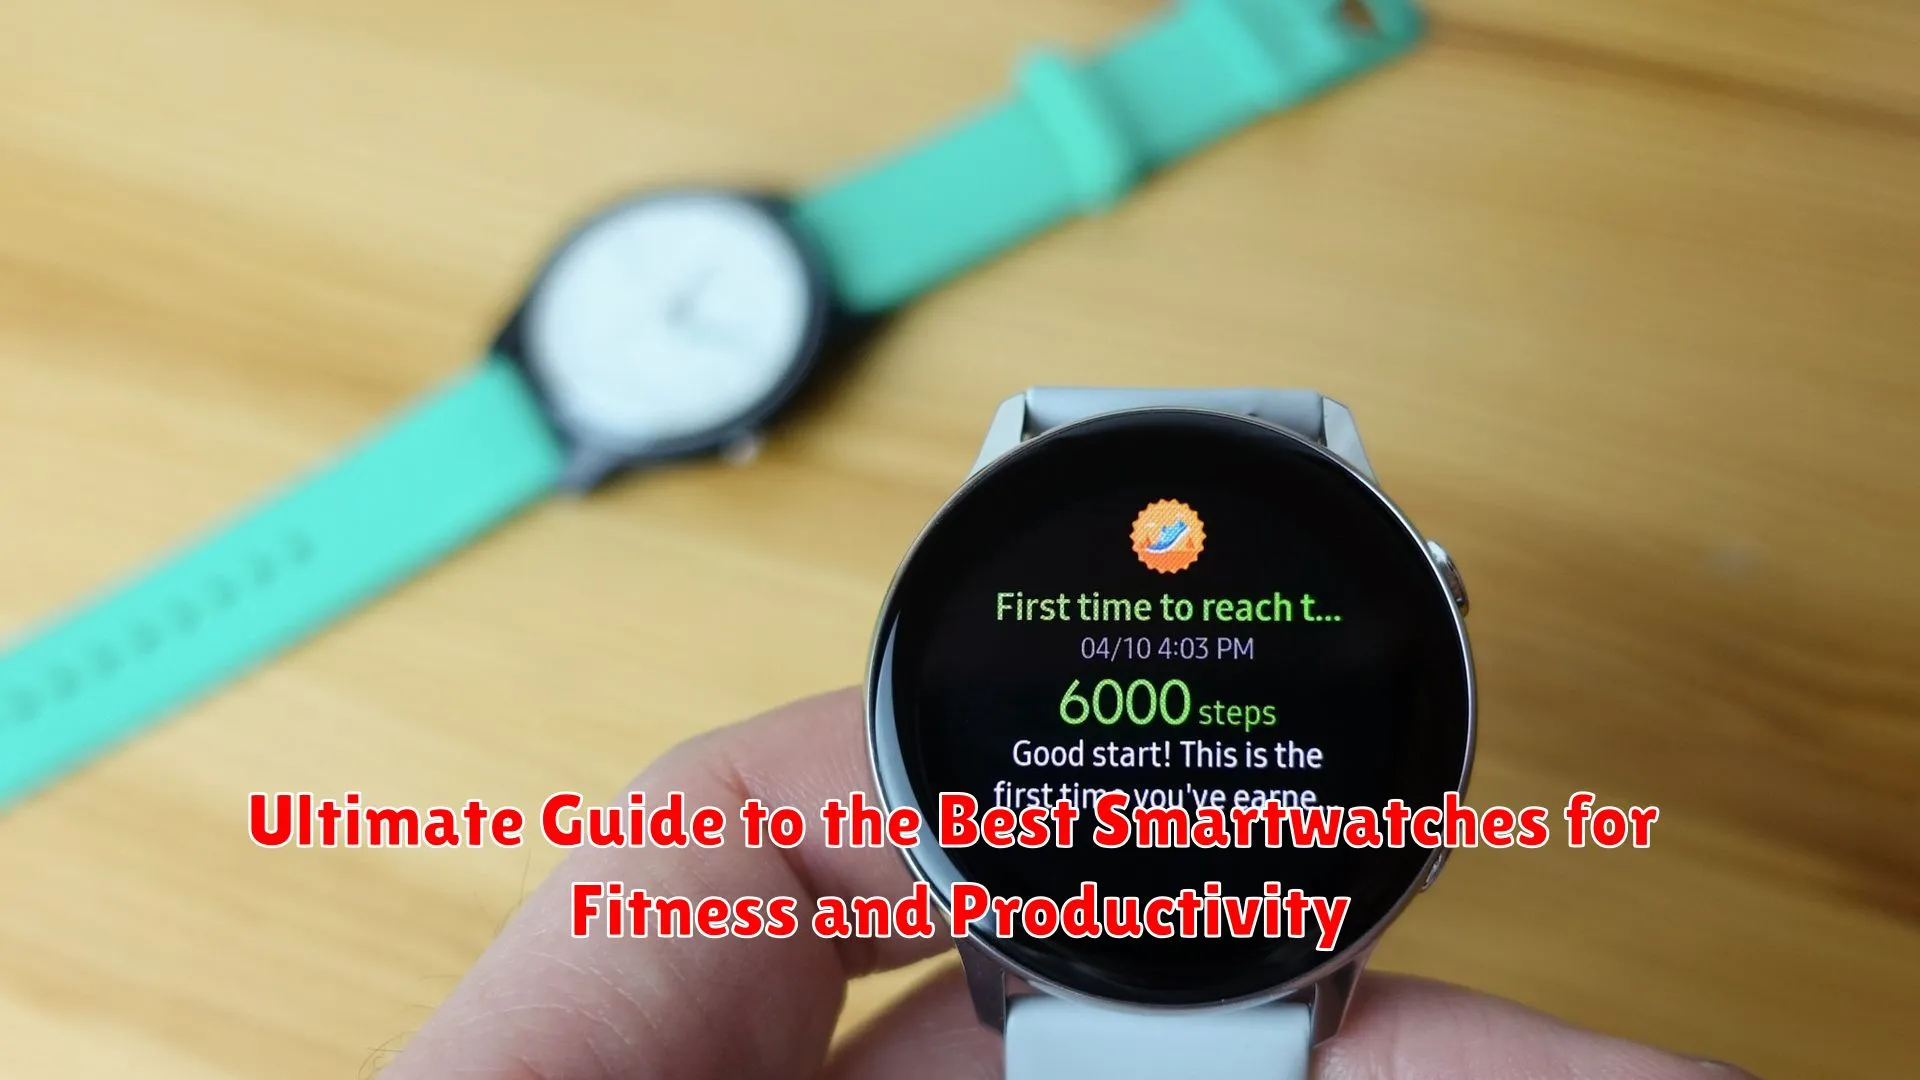 Ultimate Guide to the Best Smartwatches for Fitness and Productivity